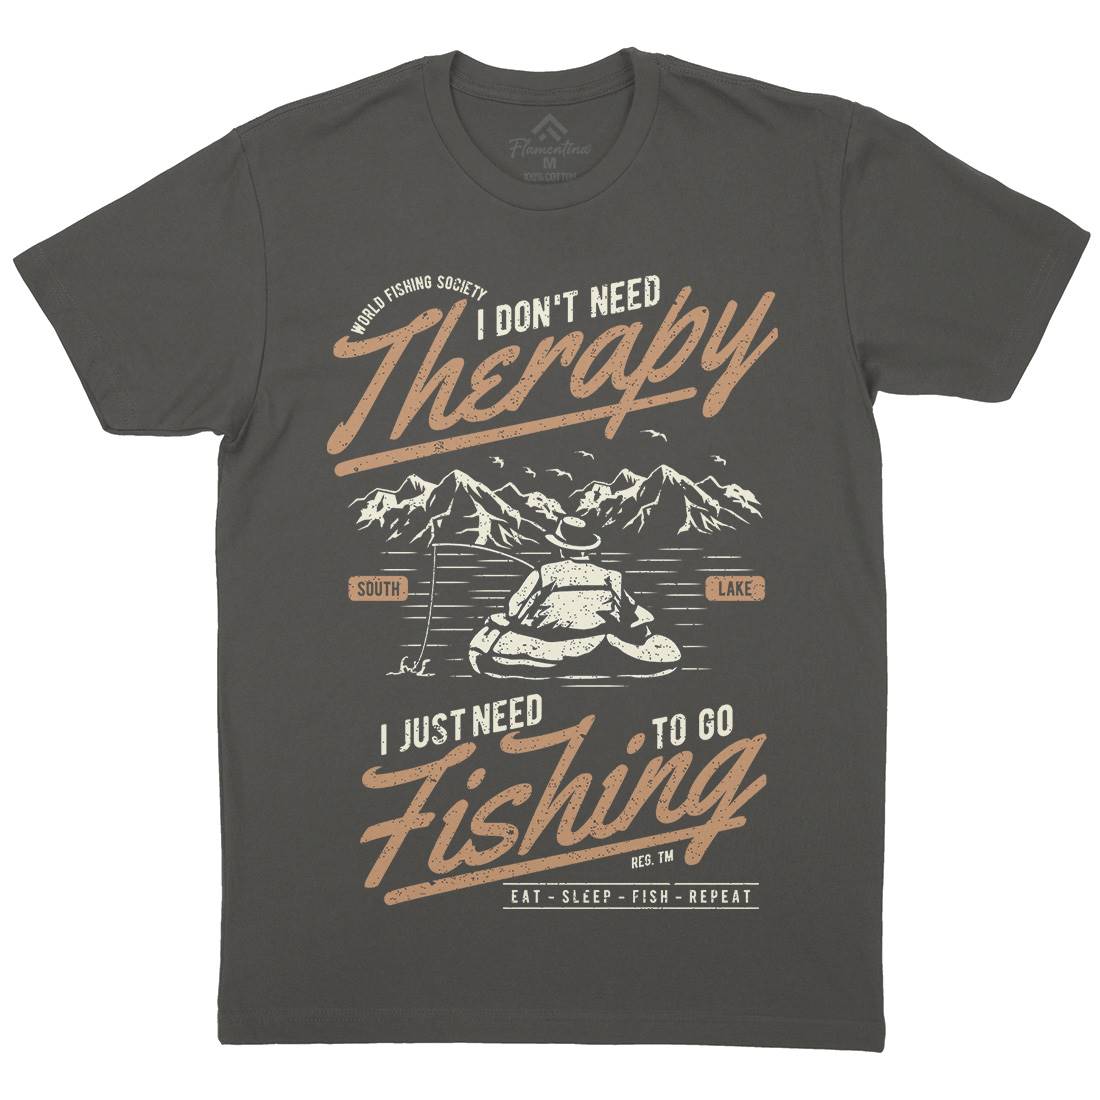 Therapy Mens Organic Crew Neck T-Shirt Fishing A662